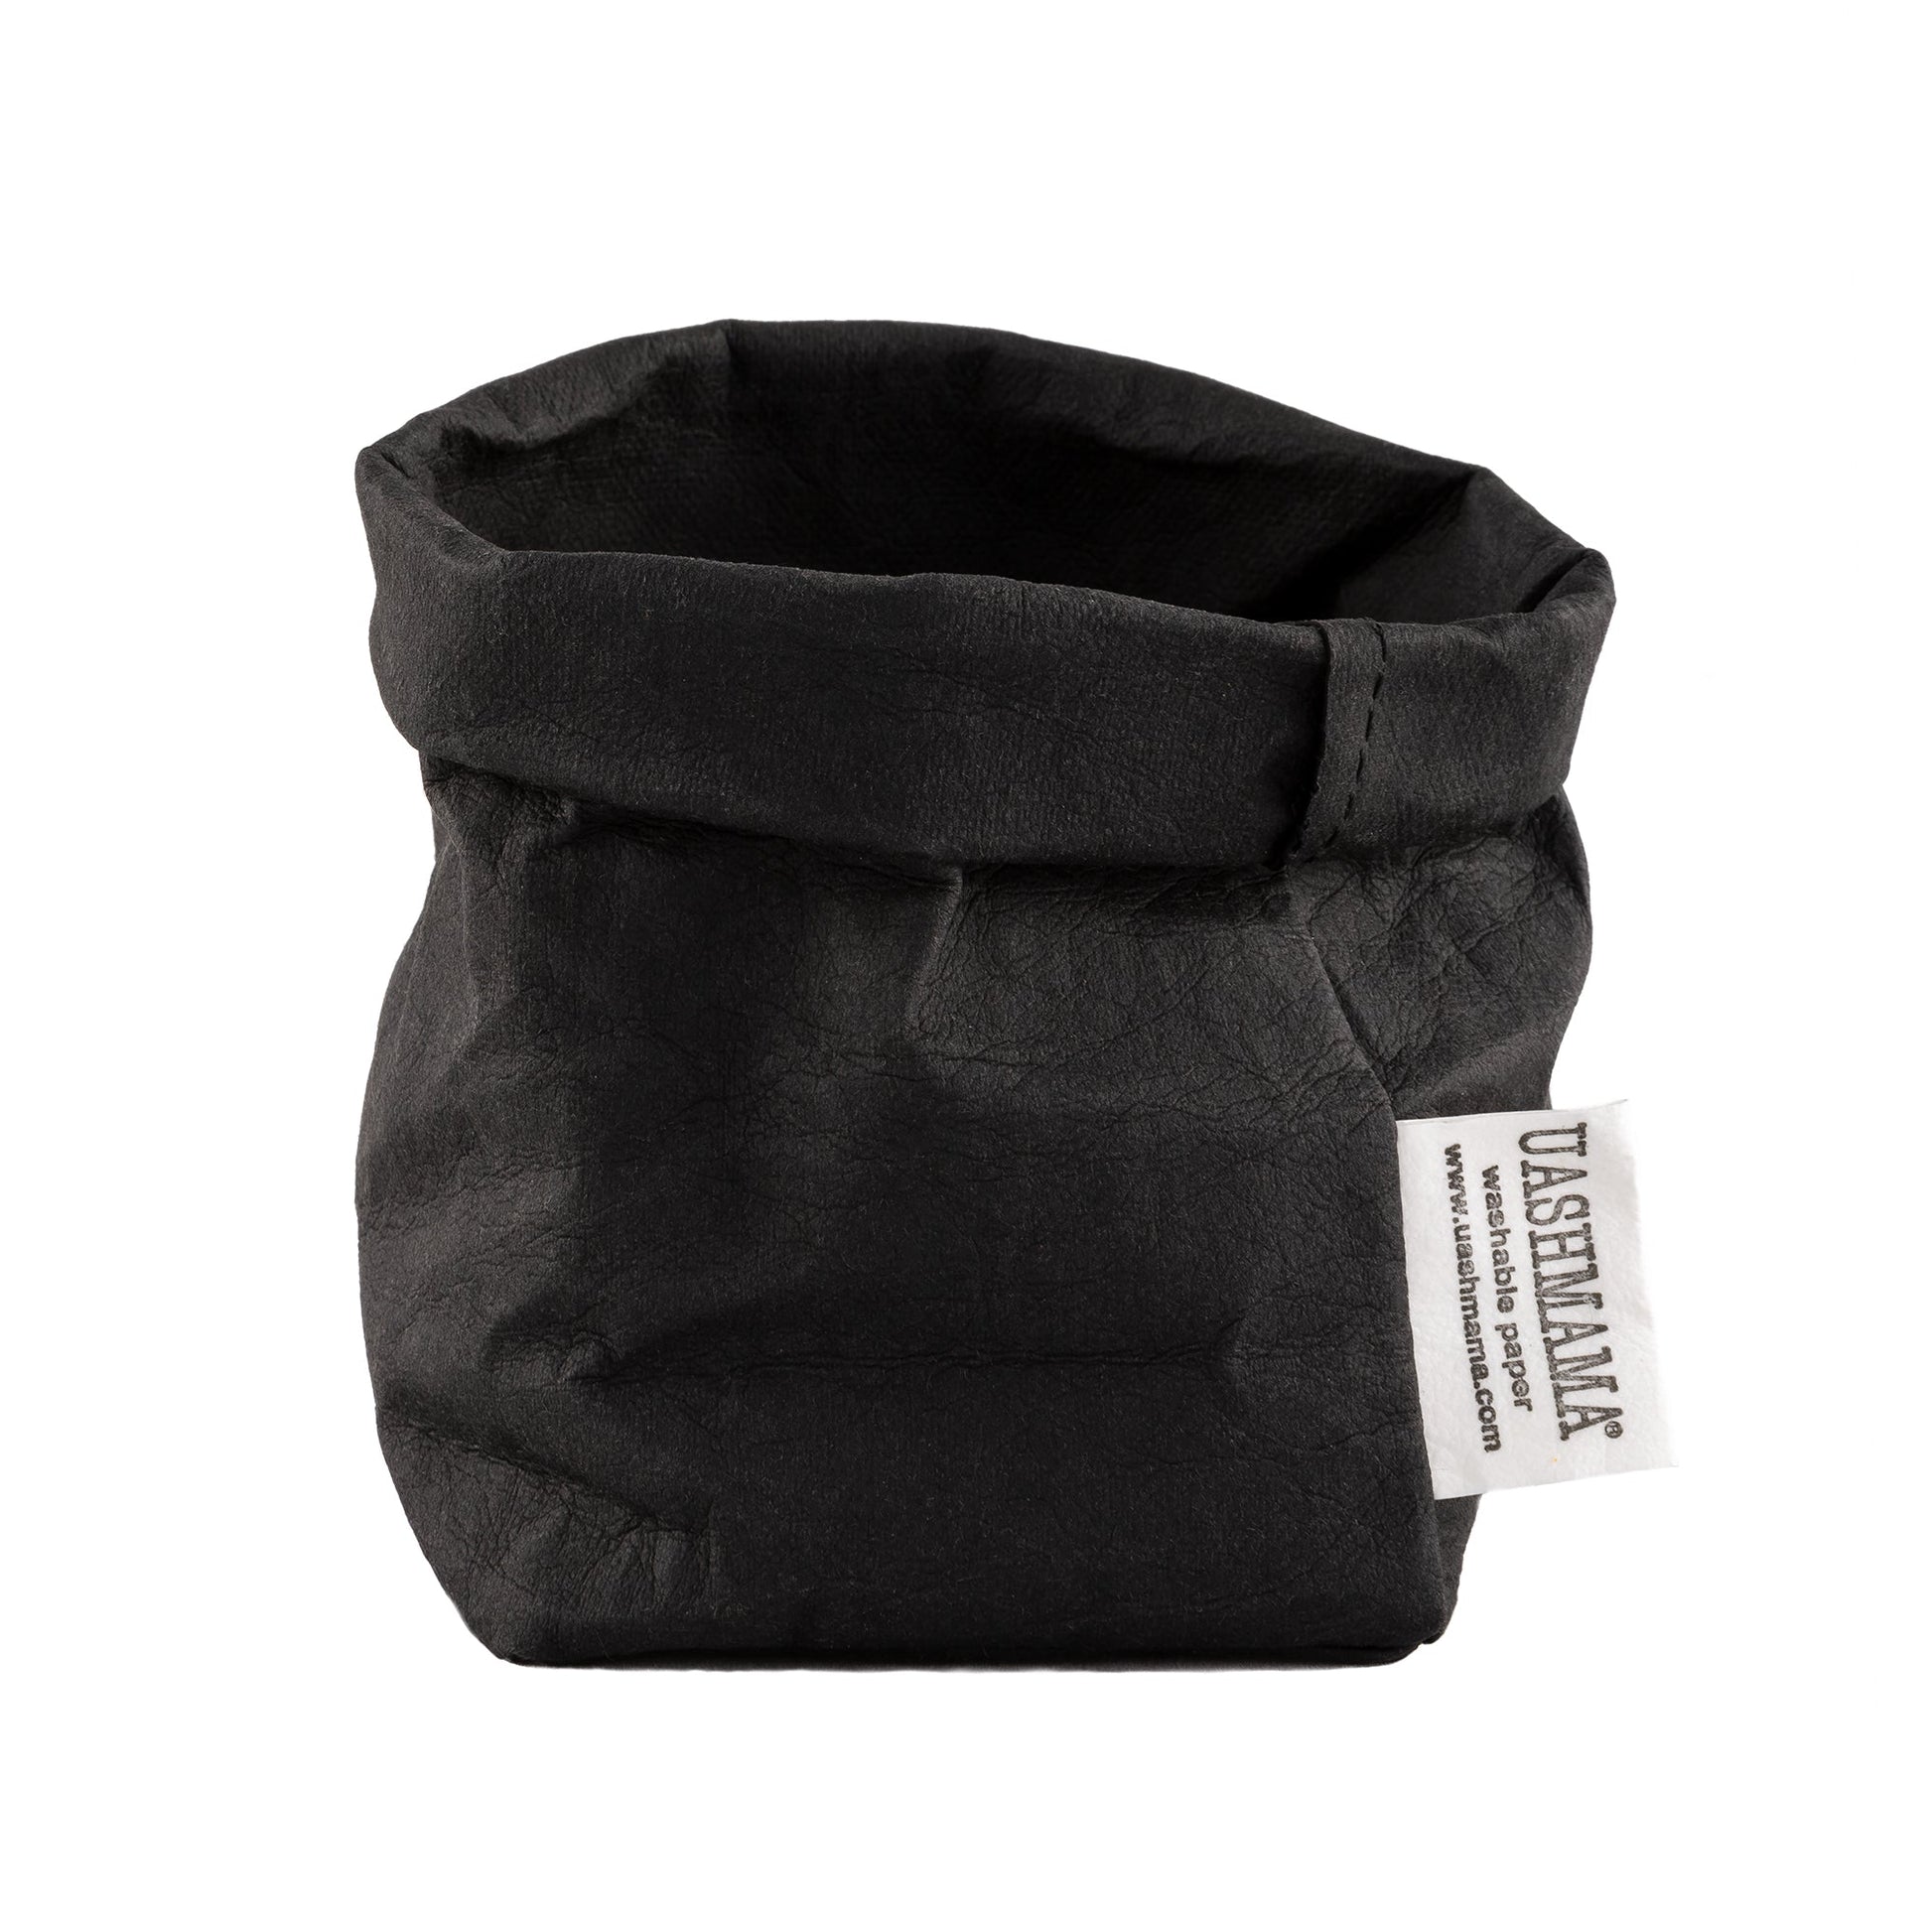 A washable paper bag is shown. The bag is rolled down at the top and features a UASHMAMA logo label on the bottom left corner. The bag pictured is the piccolo size in black.